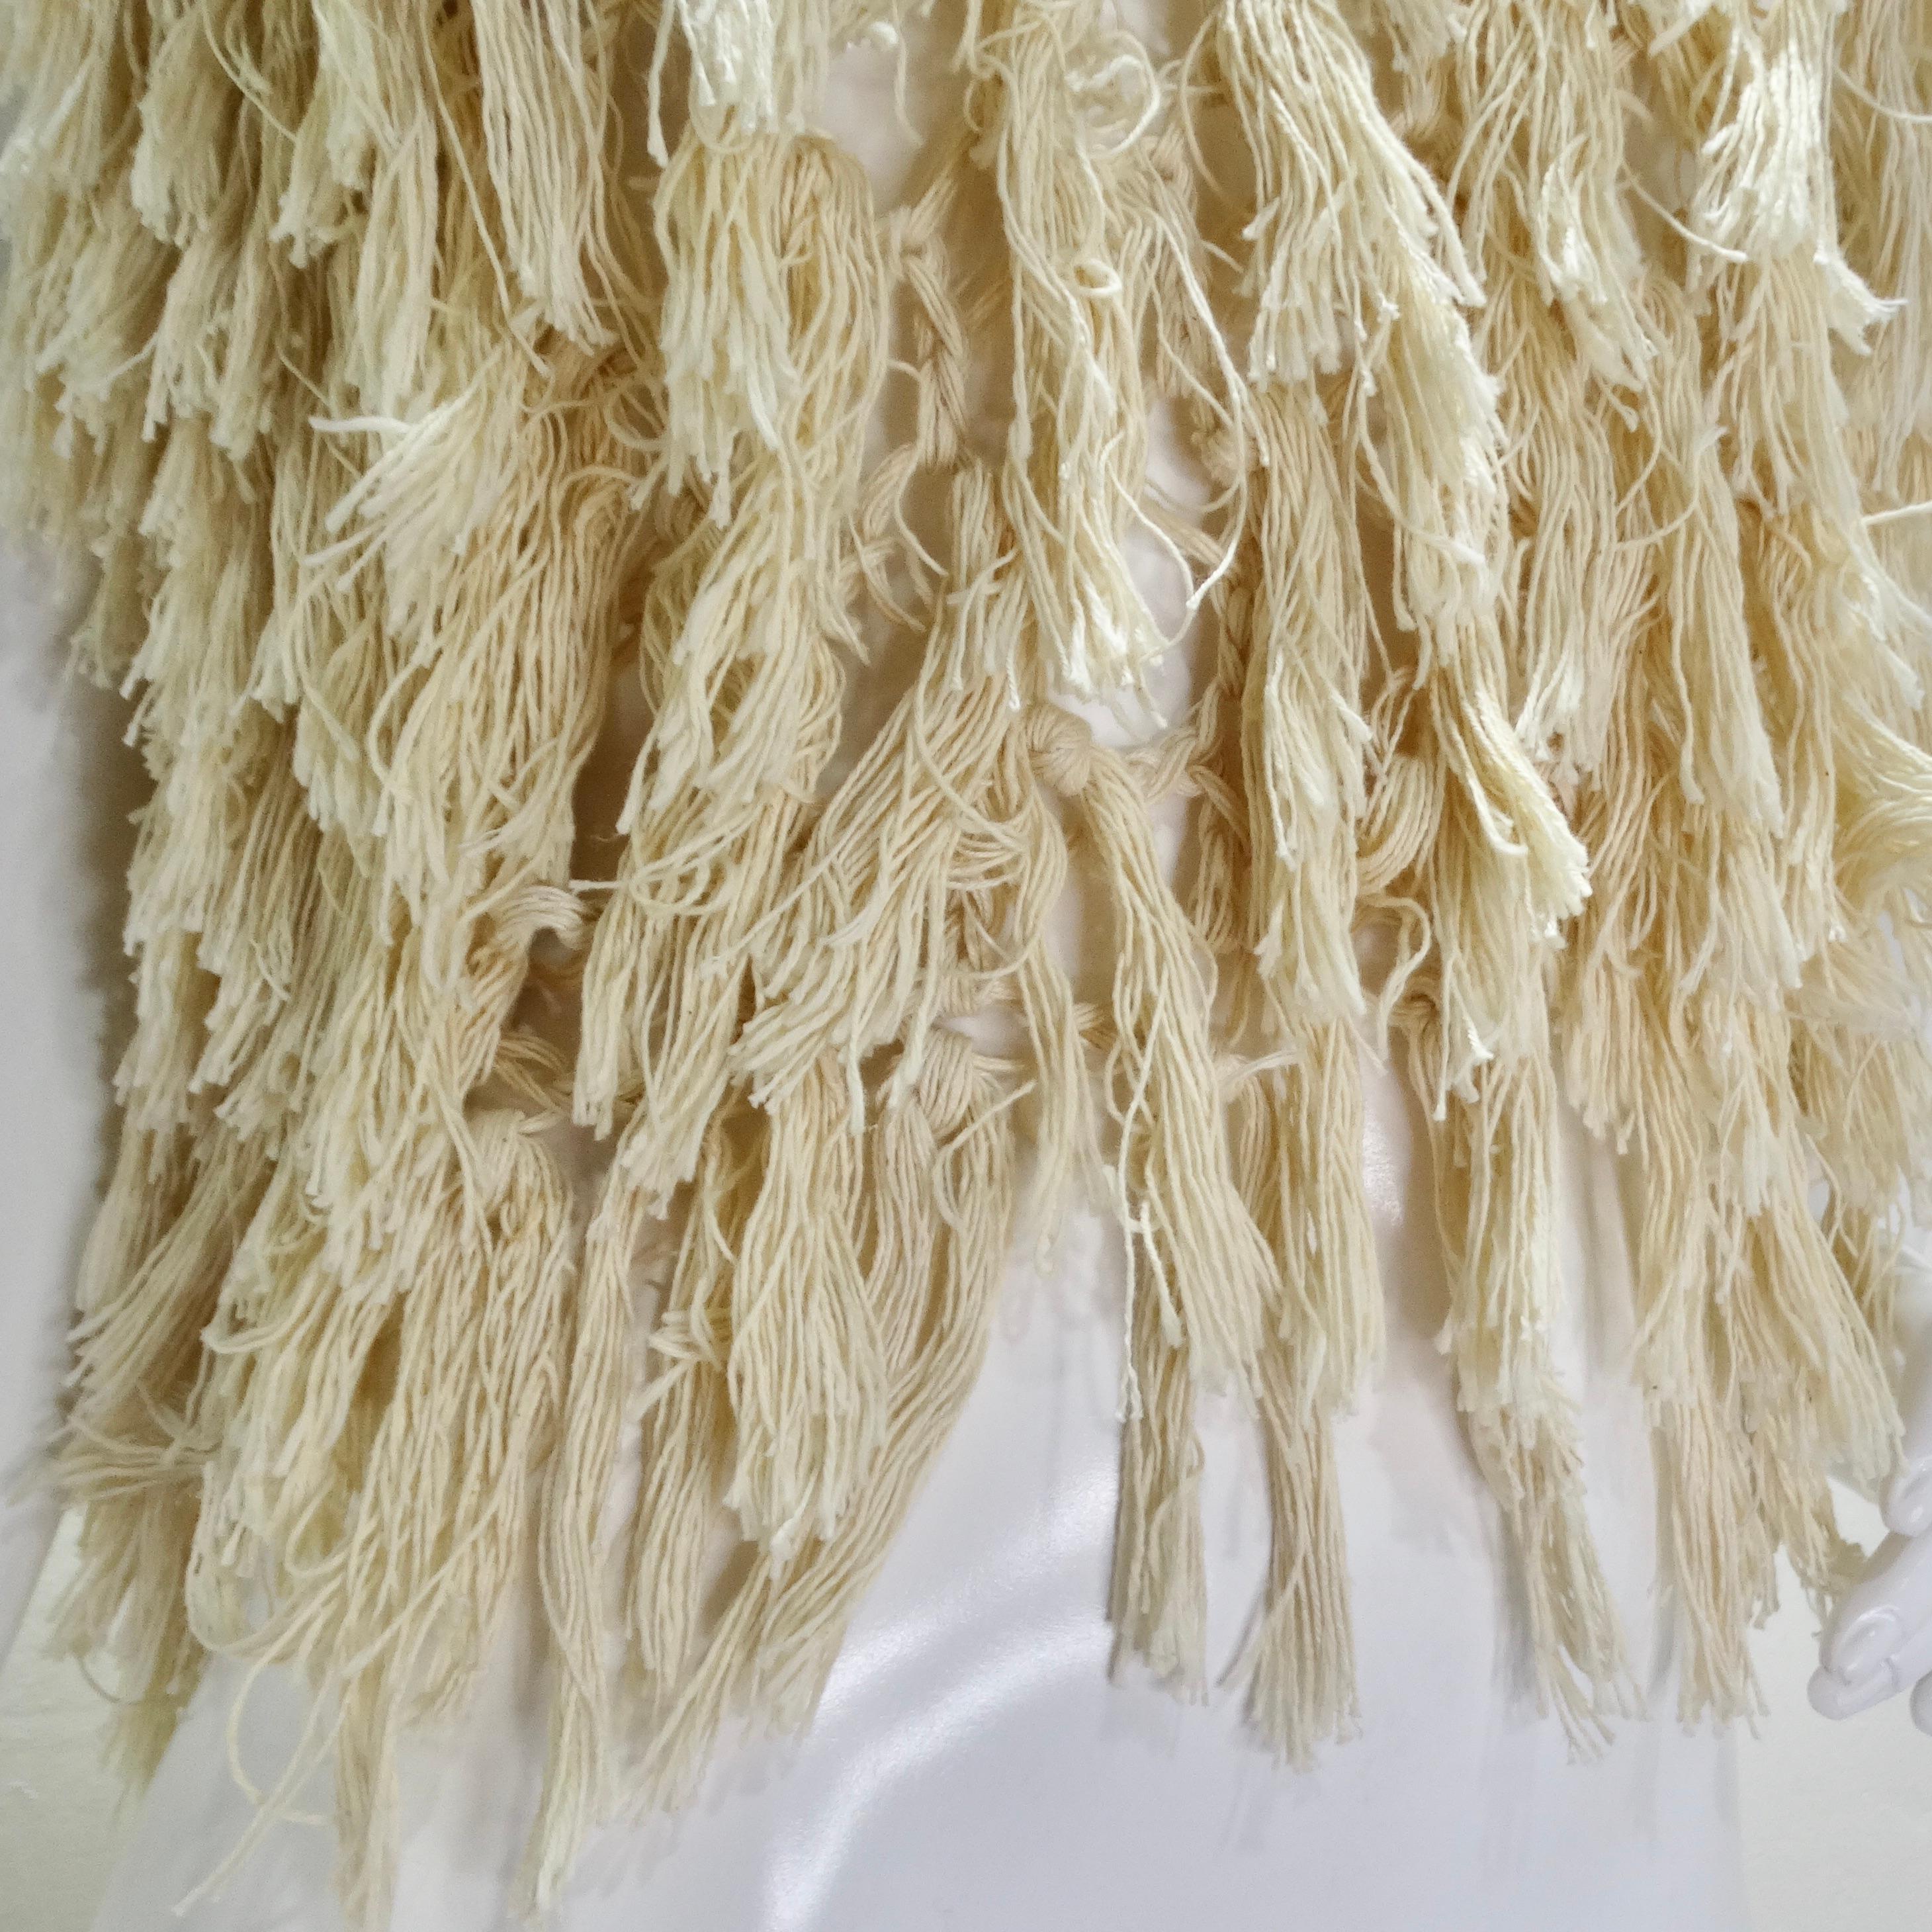 1980s Shaggy Fringe Knit Top In Excellent Condition For Sale In Scottsdale, AZ